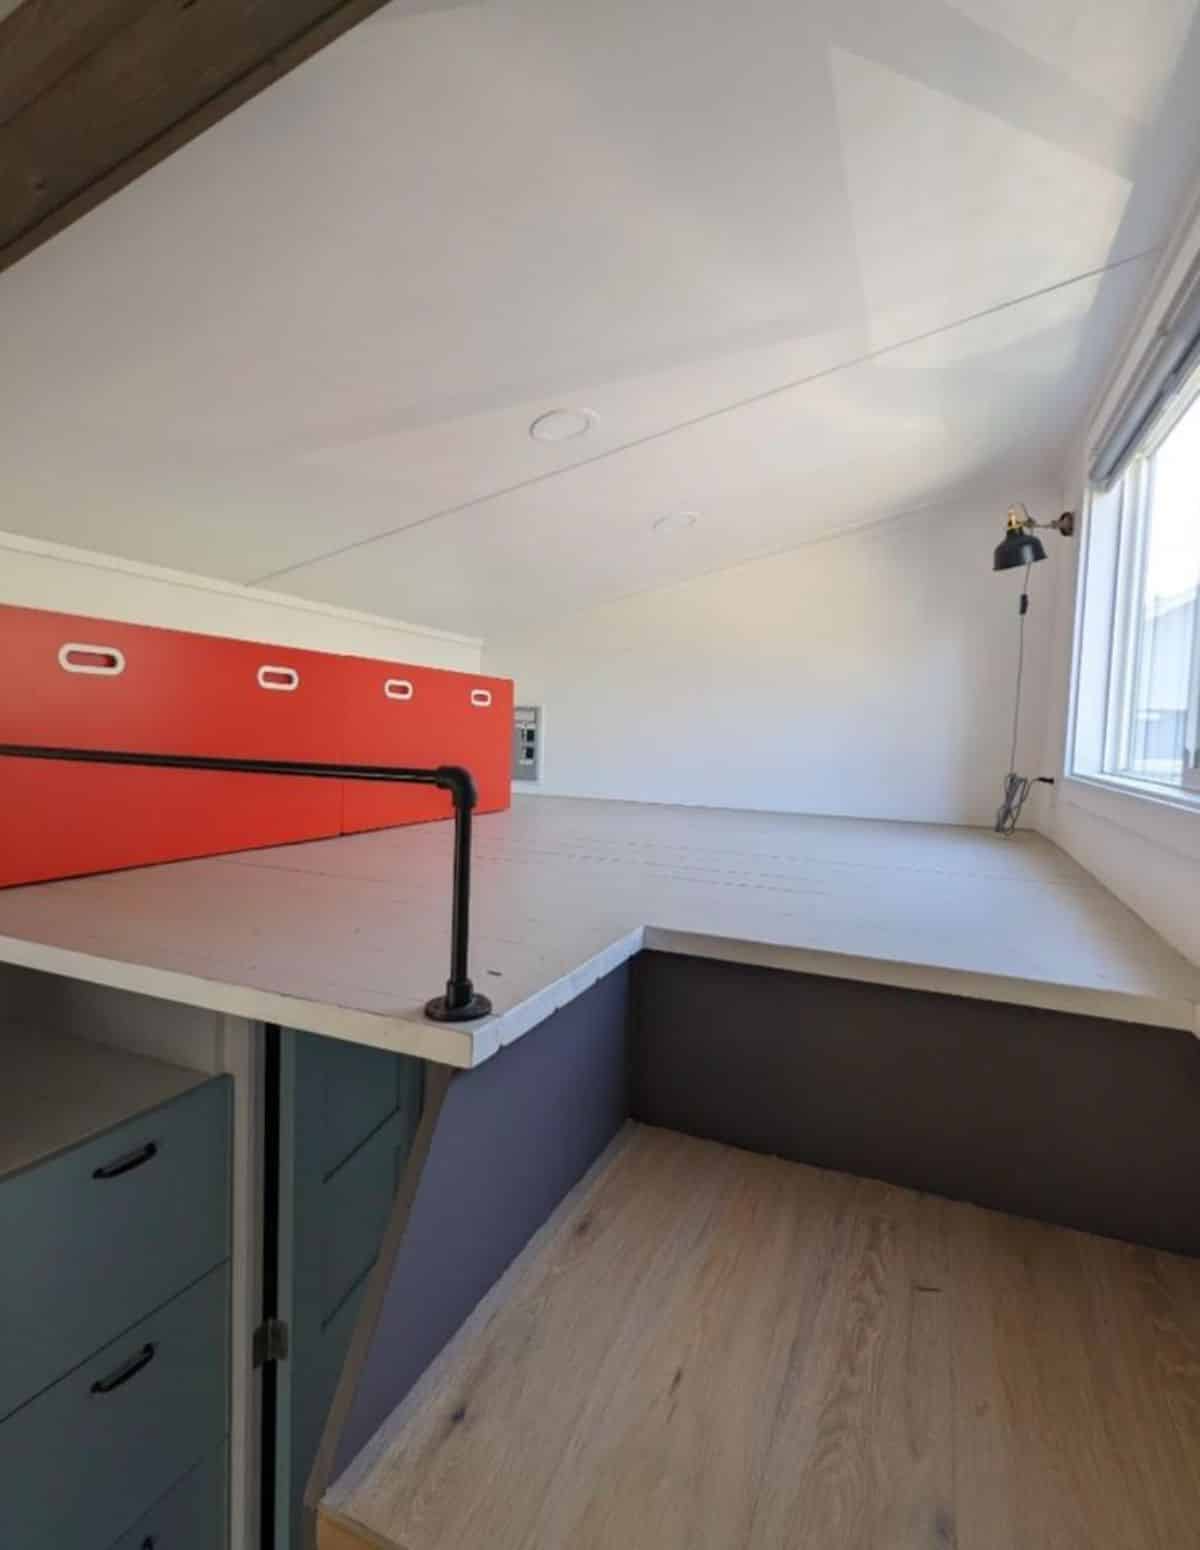 loft bedroom of three bedroom tiny house is huge with storage cabinets